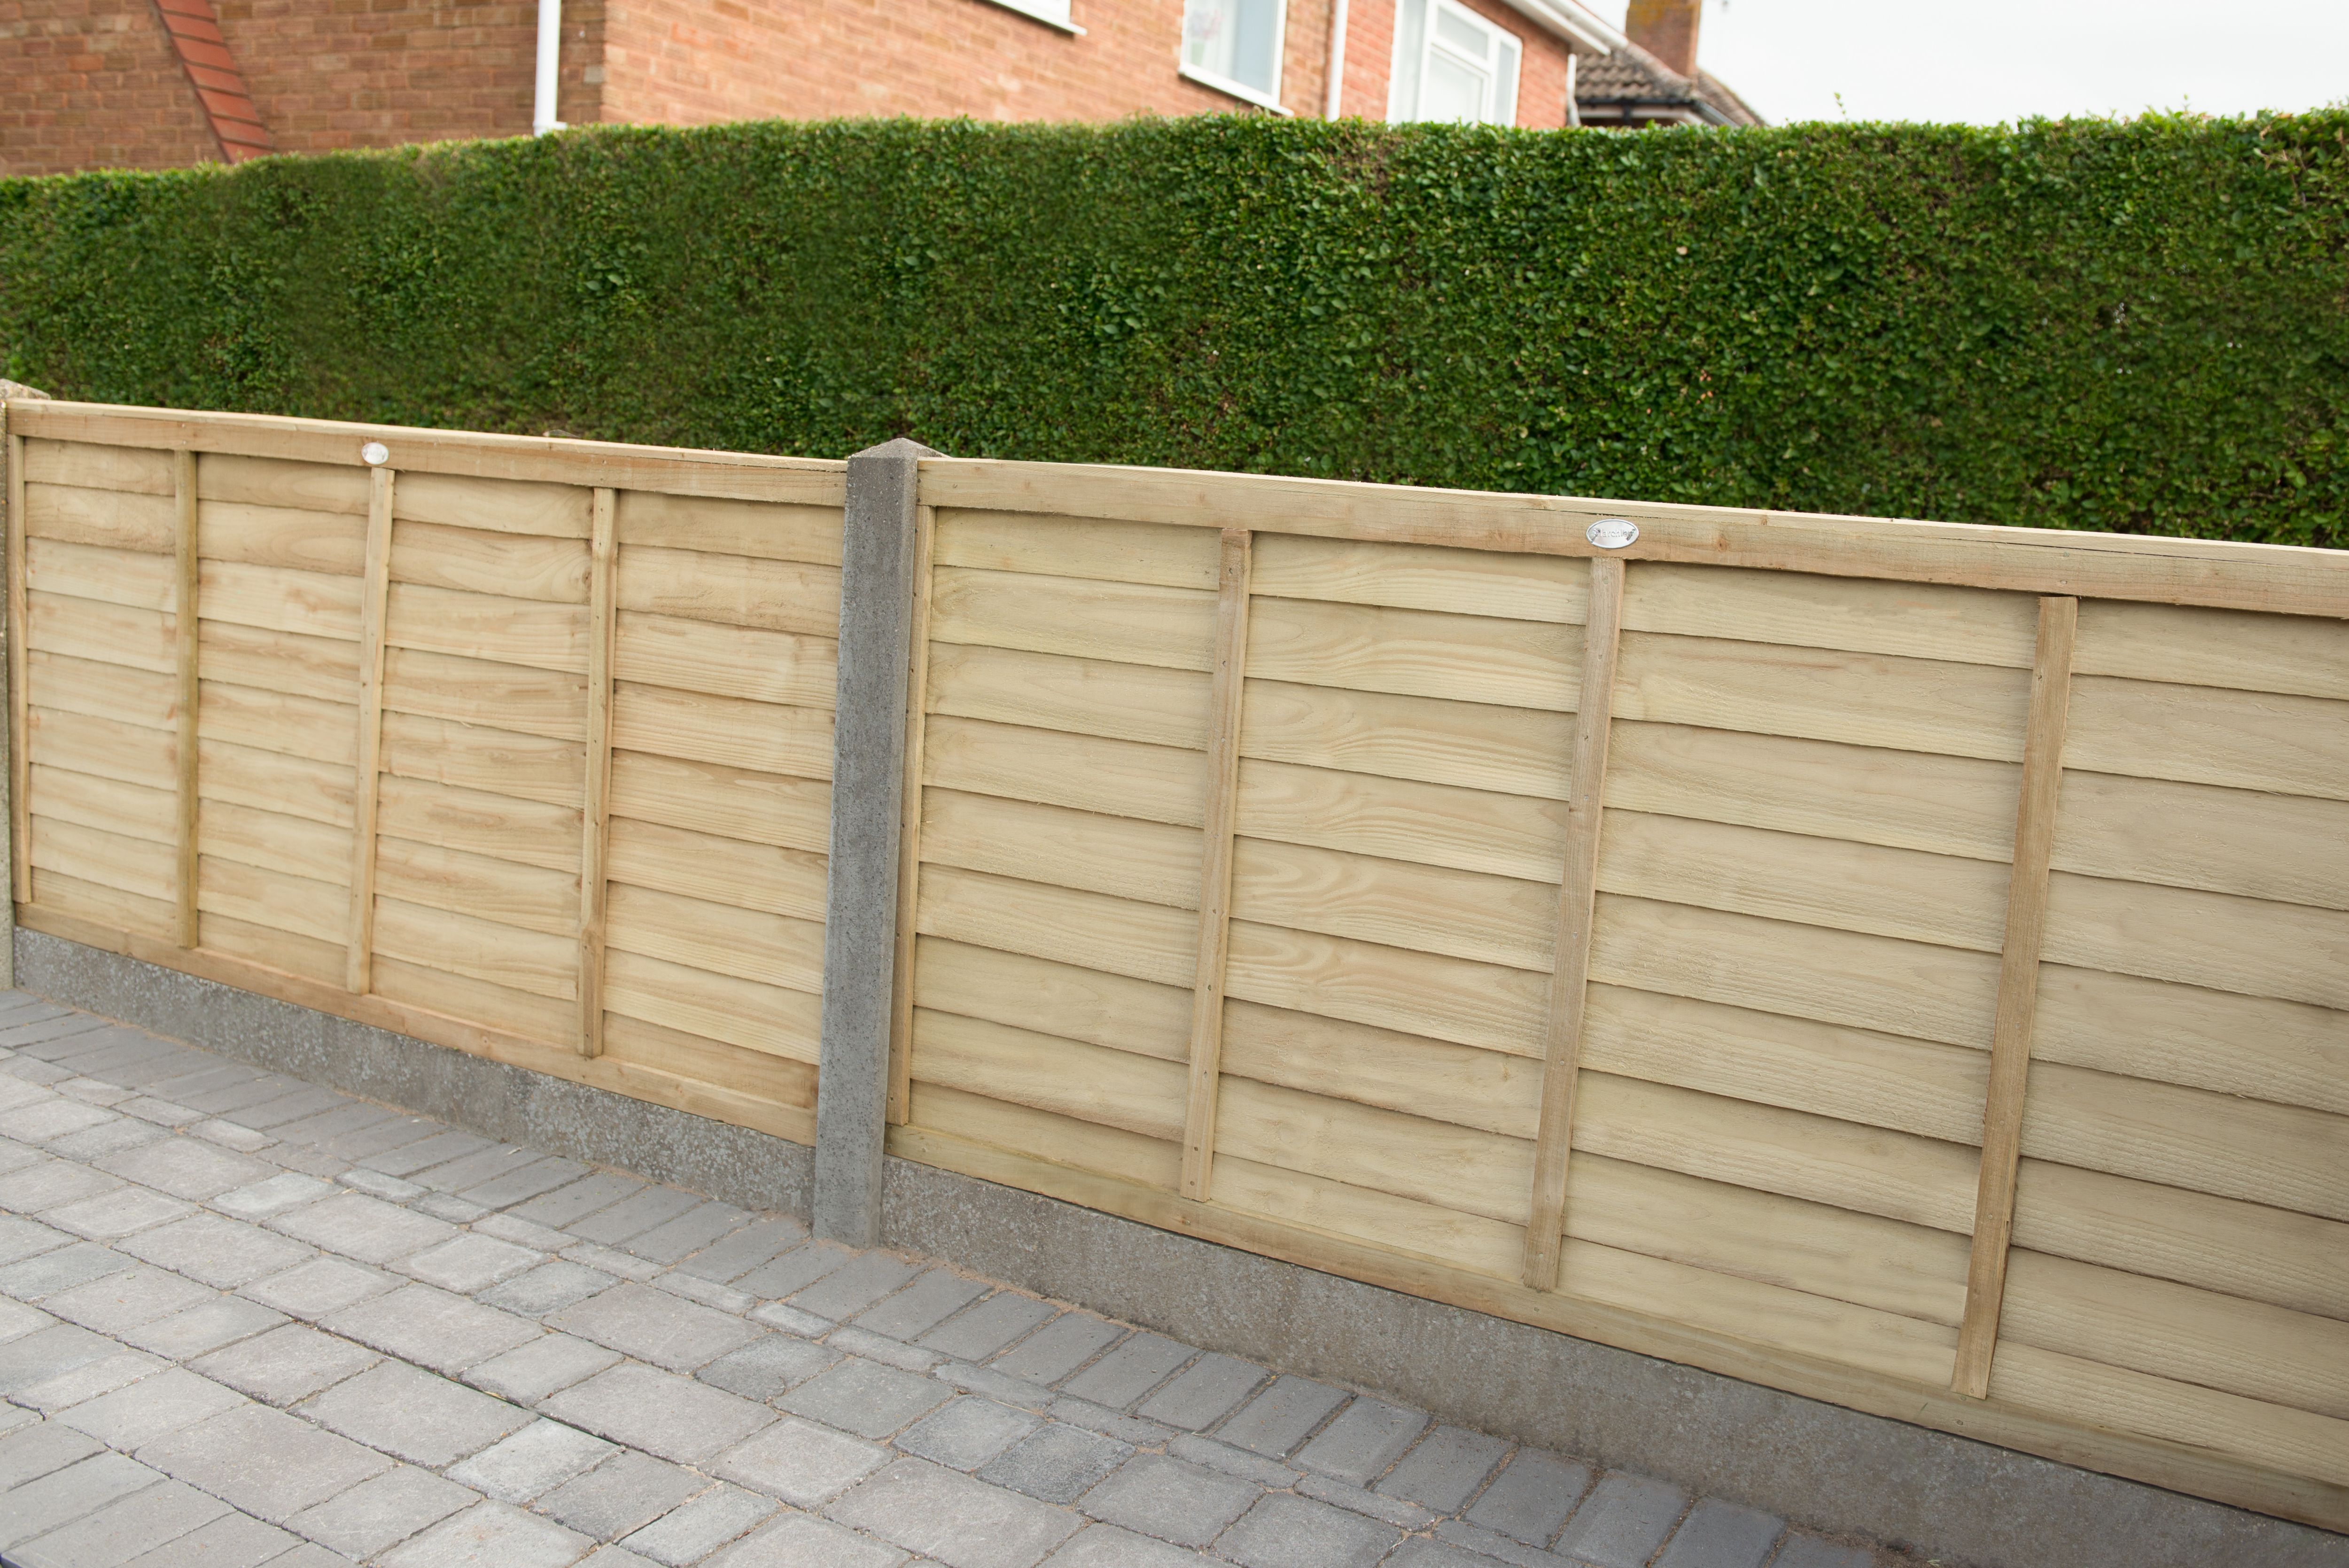 Forest Garden Pressure Treated Overlap Fence Panel - 6 x 4ft